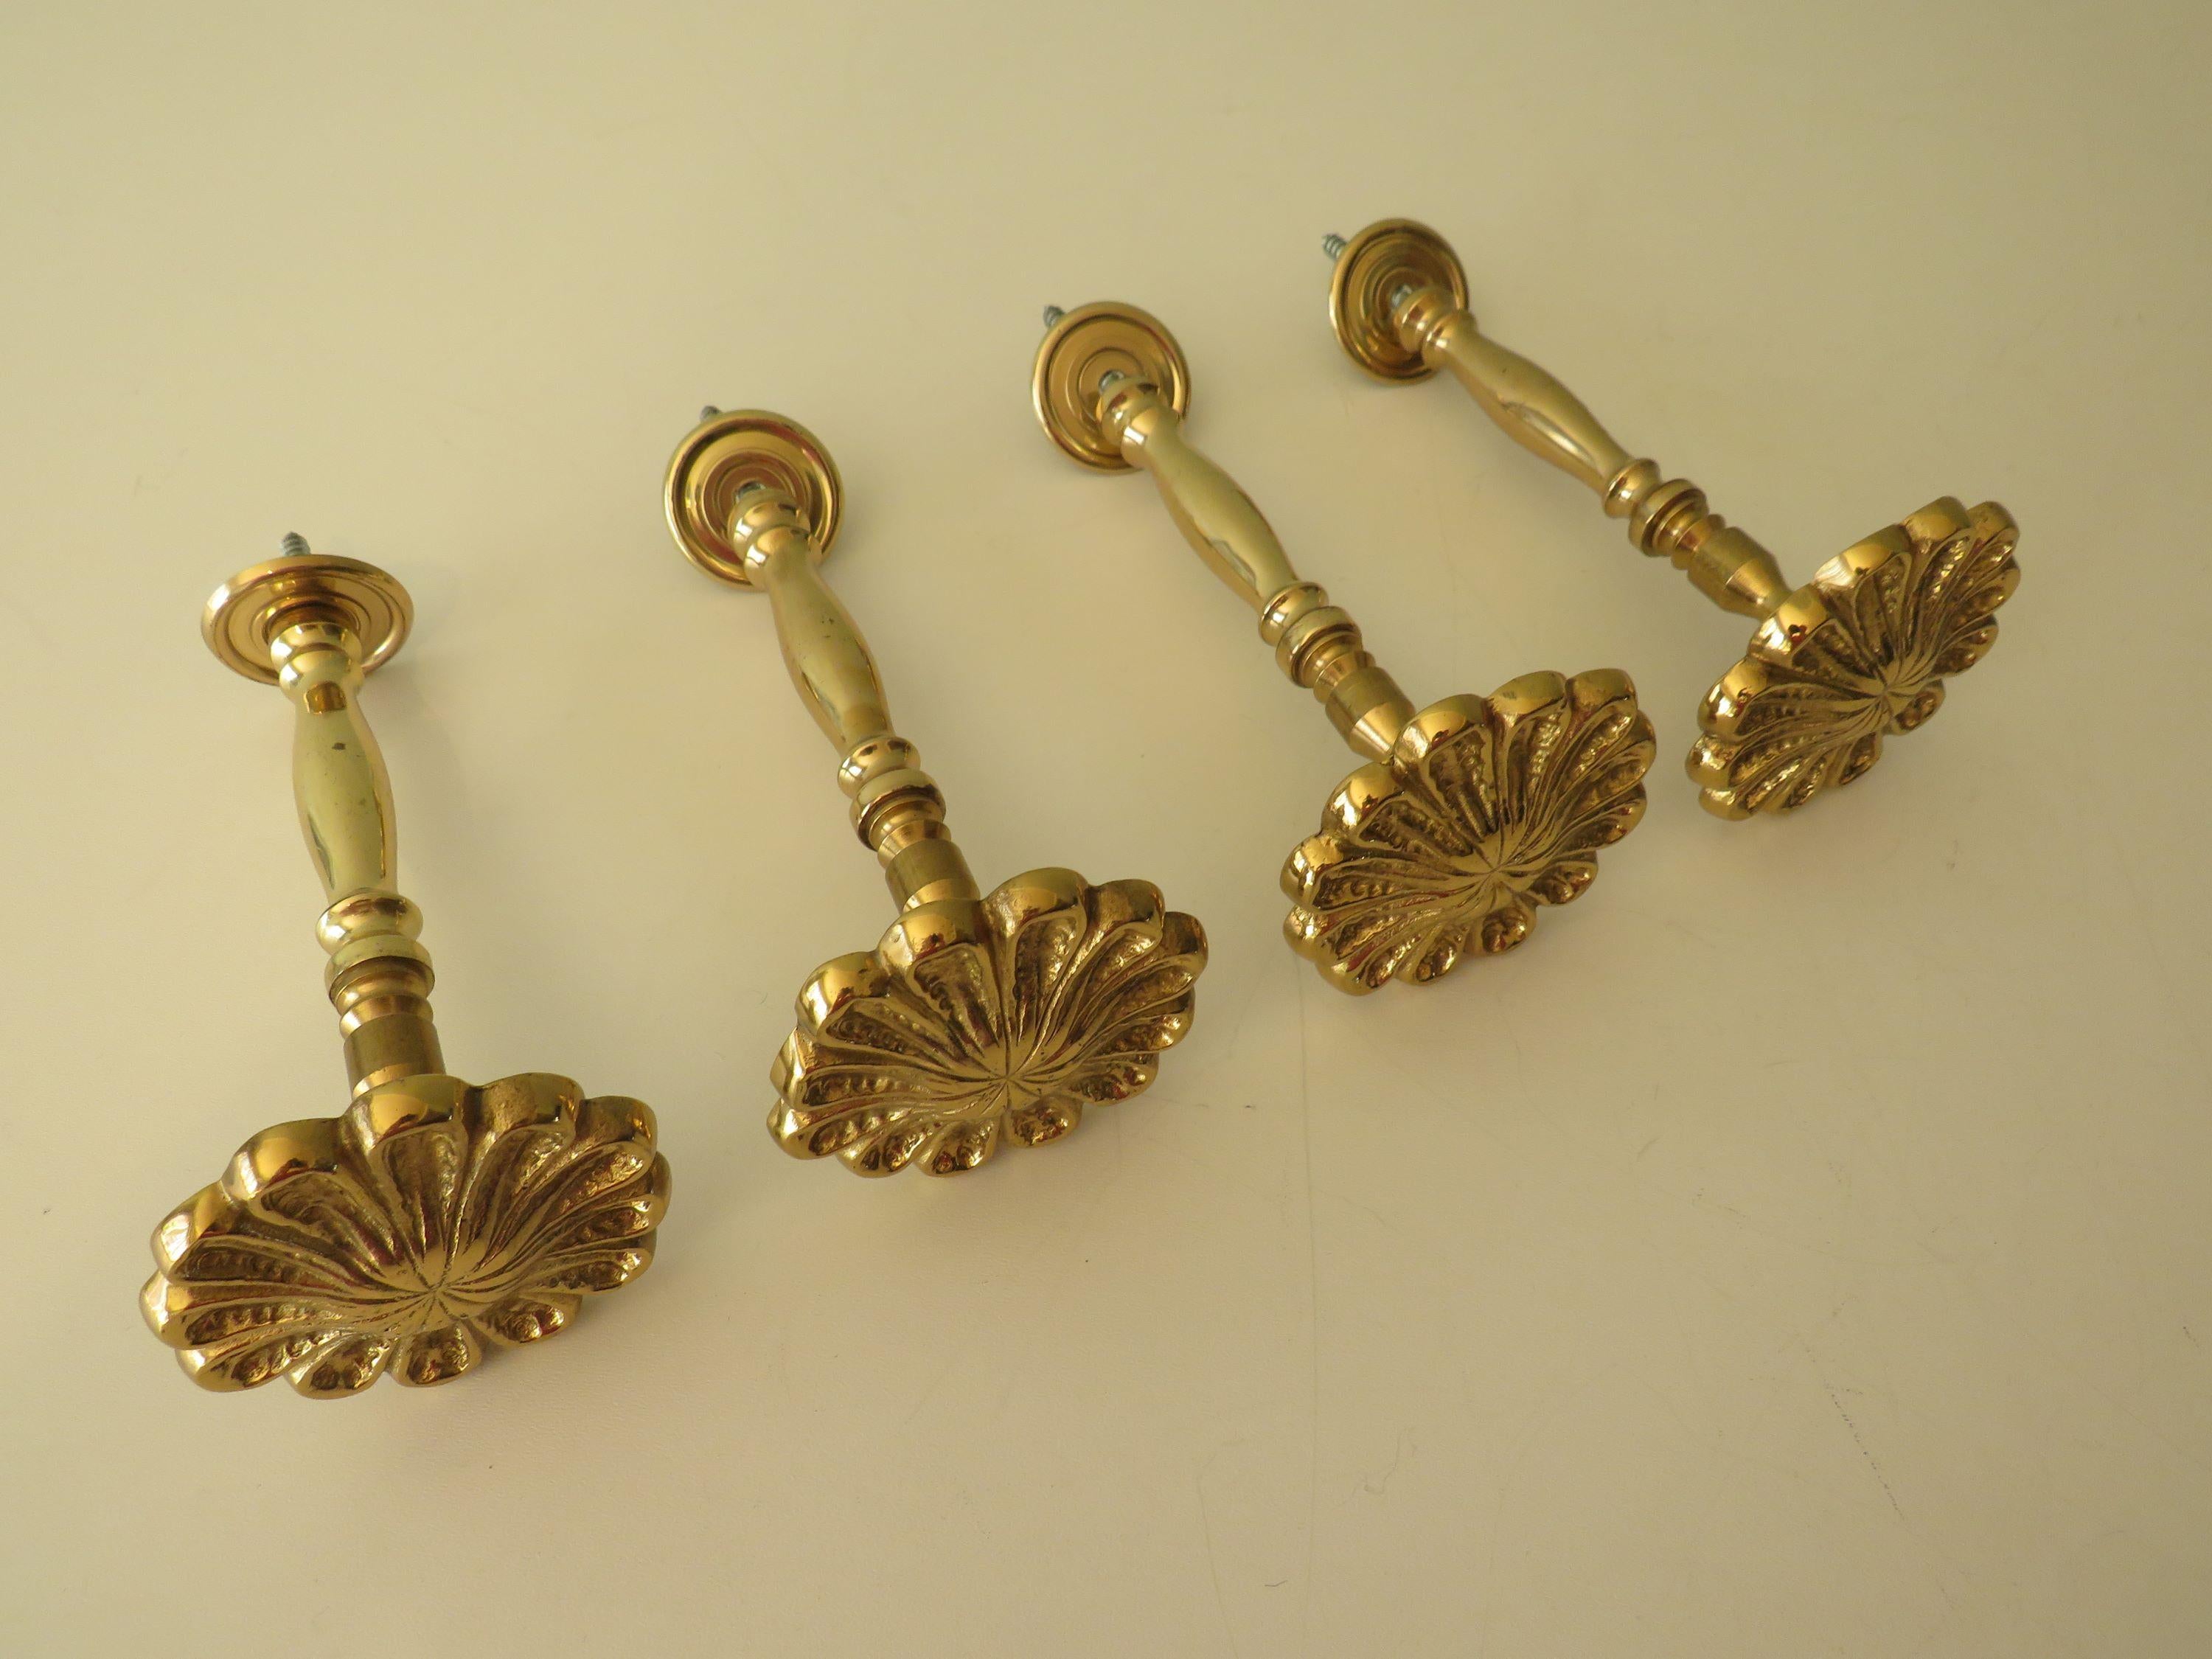 Hollywood Regency French Midcentury Brass Curtain Holder, Curtain Tie Back, Set of 4